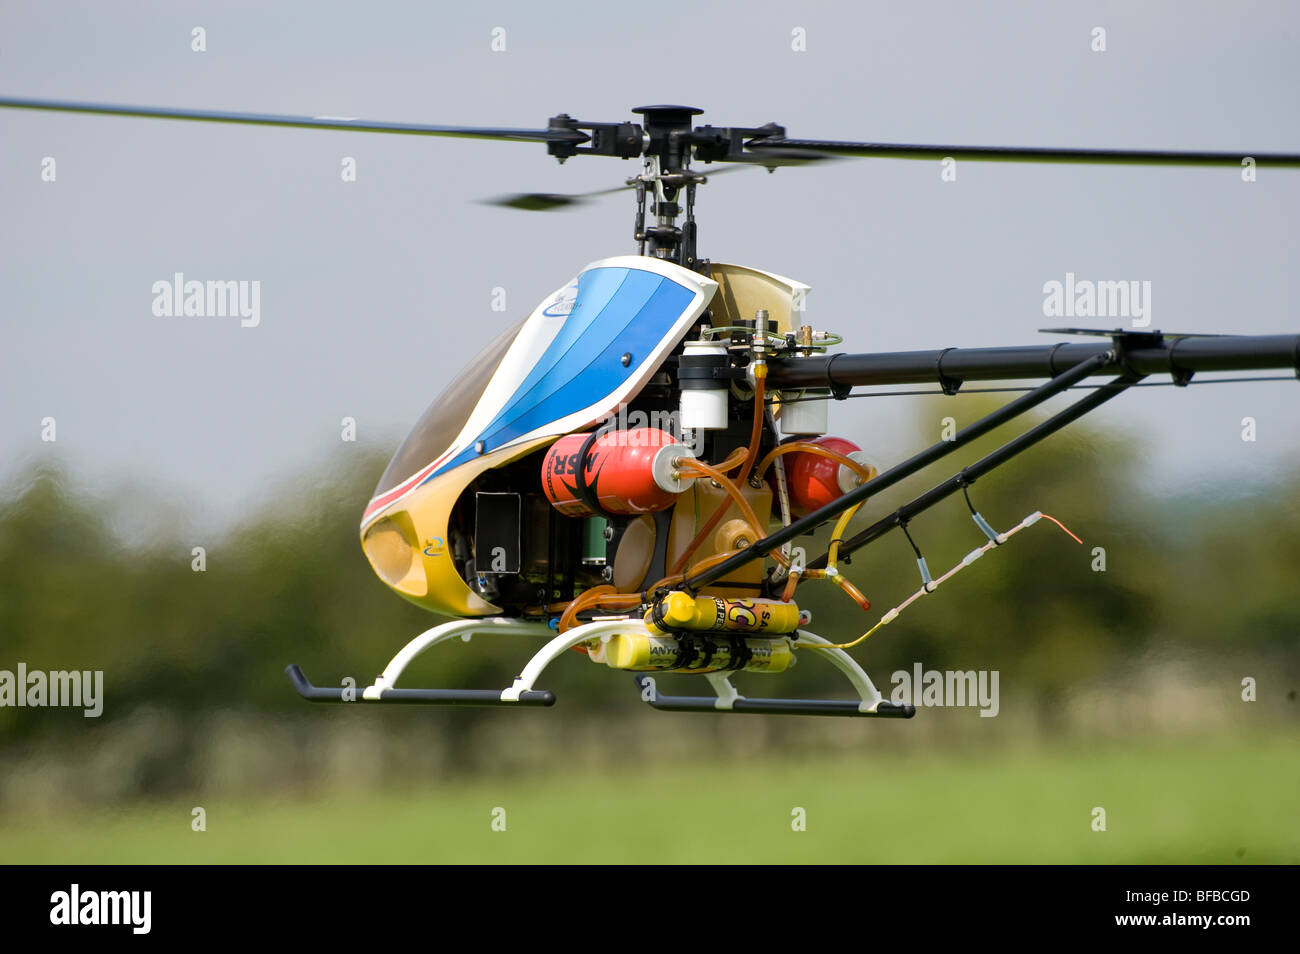 Close up detail of a Jet turbine radio control helicopter in flight. Stock Photo